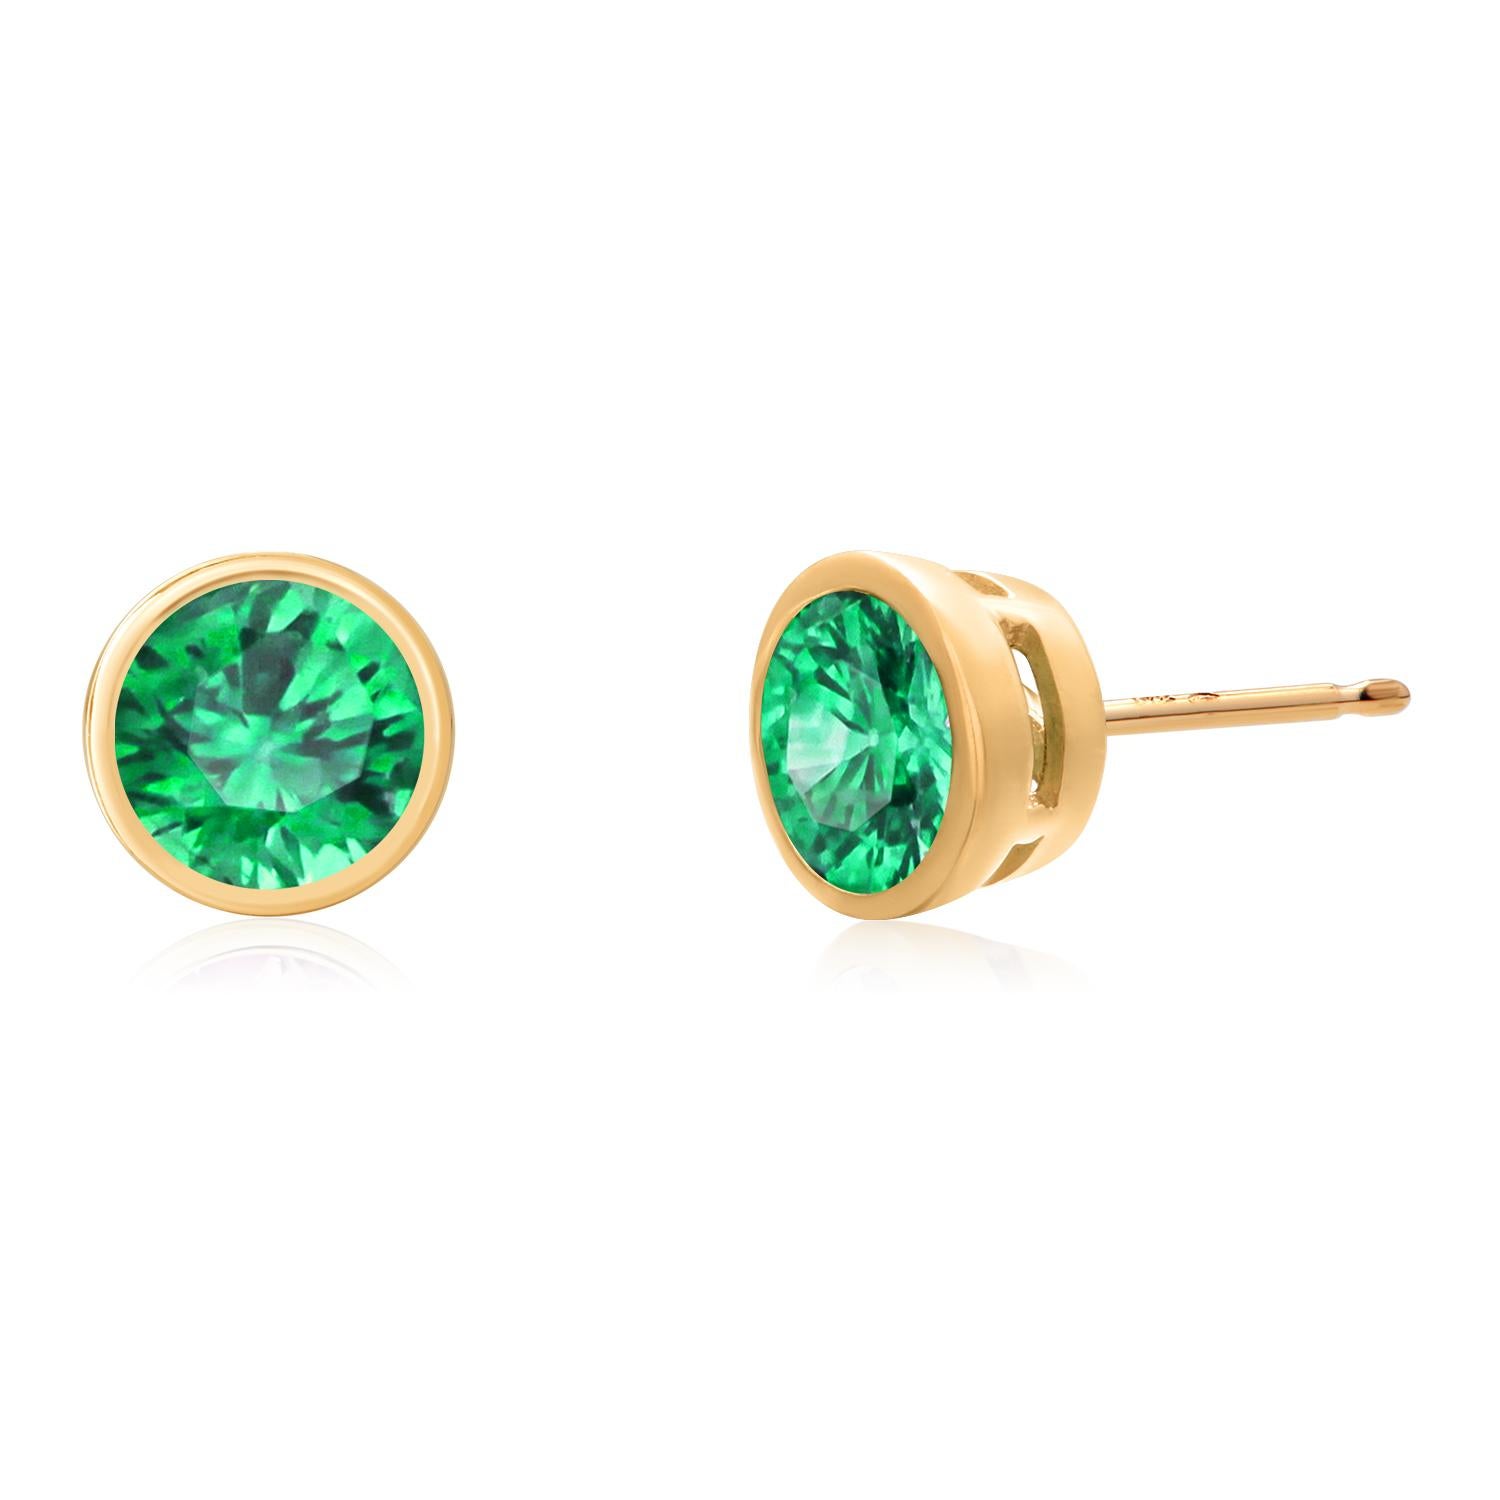 Matched Round Emeralds 0.35 Carats 0.17 Inch 14 Karat Yellow Gold Stud Earrings  For Sale 3